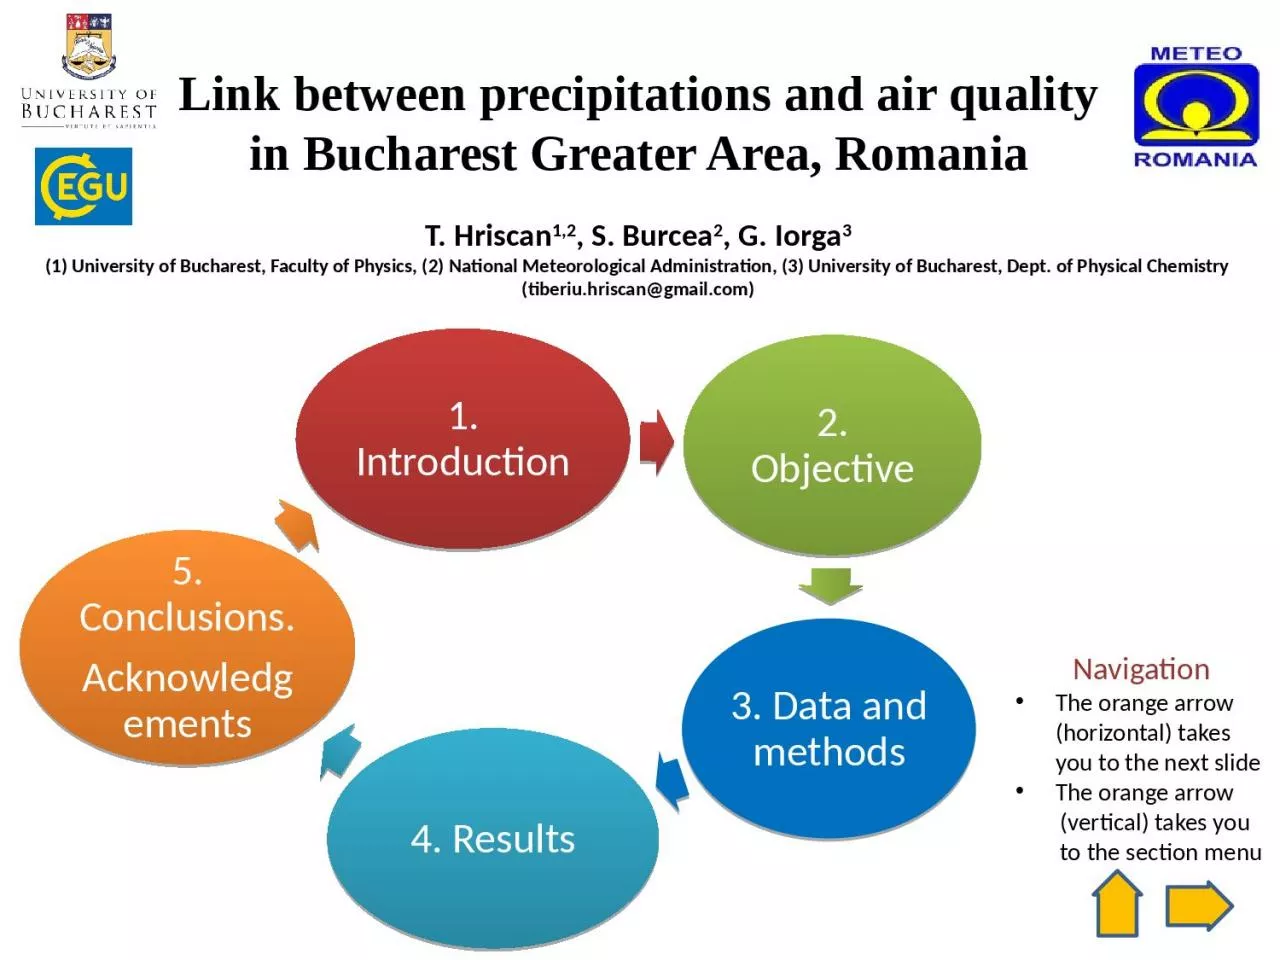 Link between precipitations and air quality in Bucharest